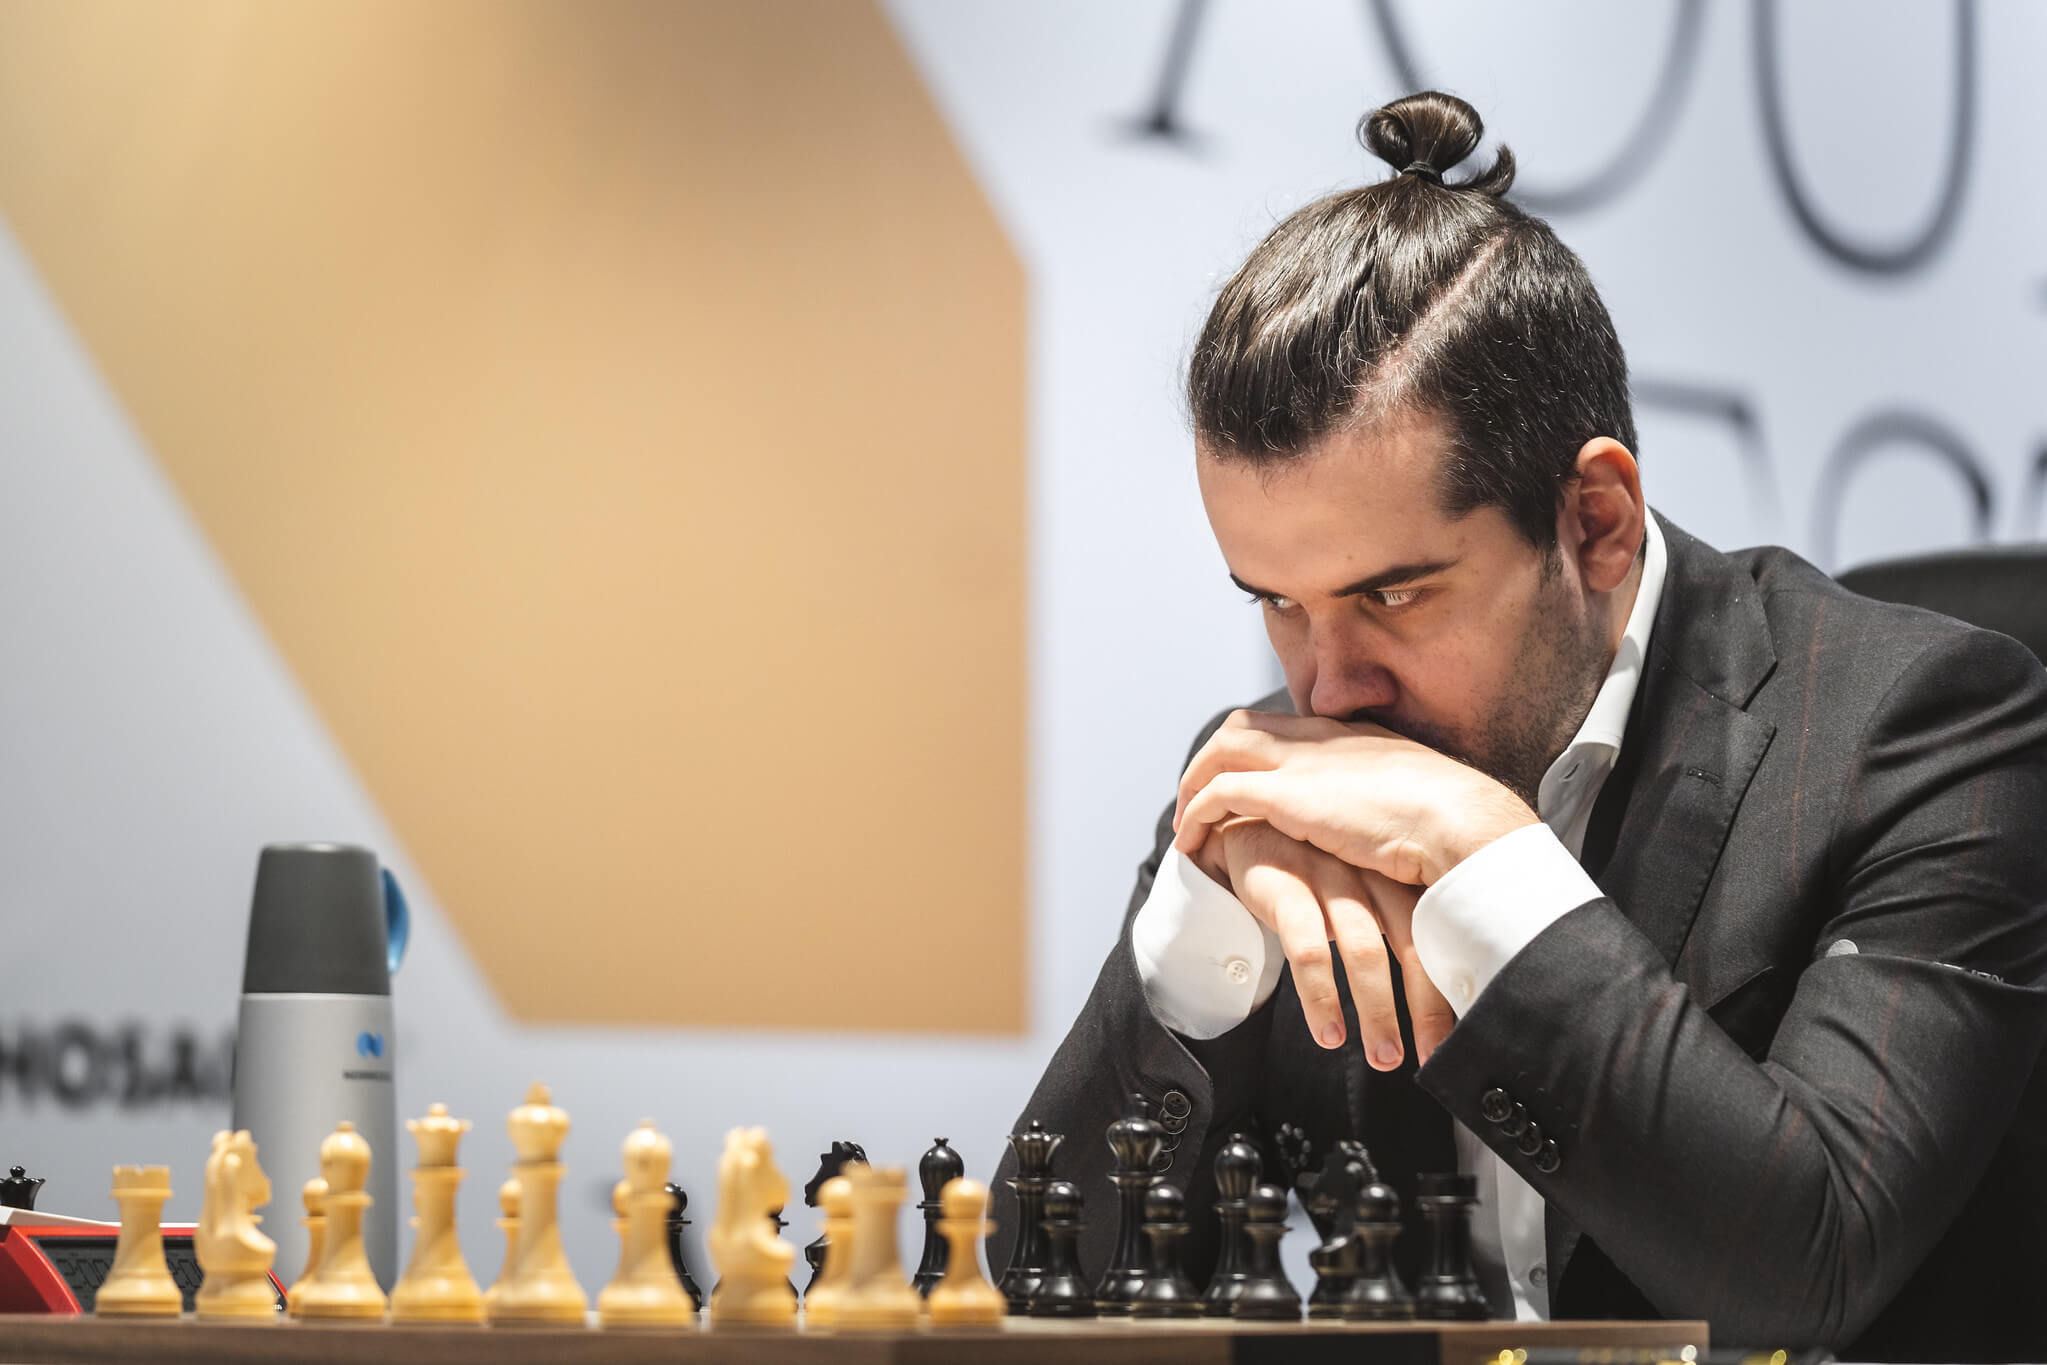 World Chess Championship Nepo Lost Game 8, His Chances to Win the